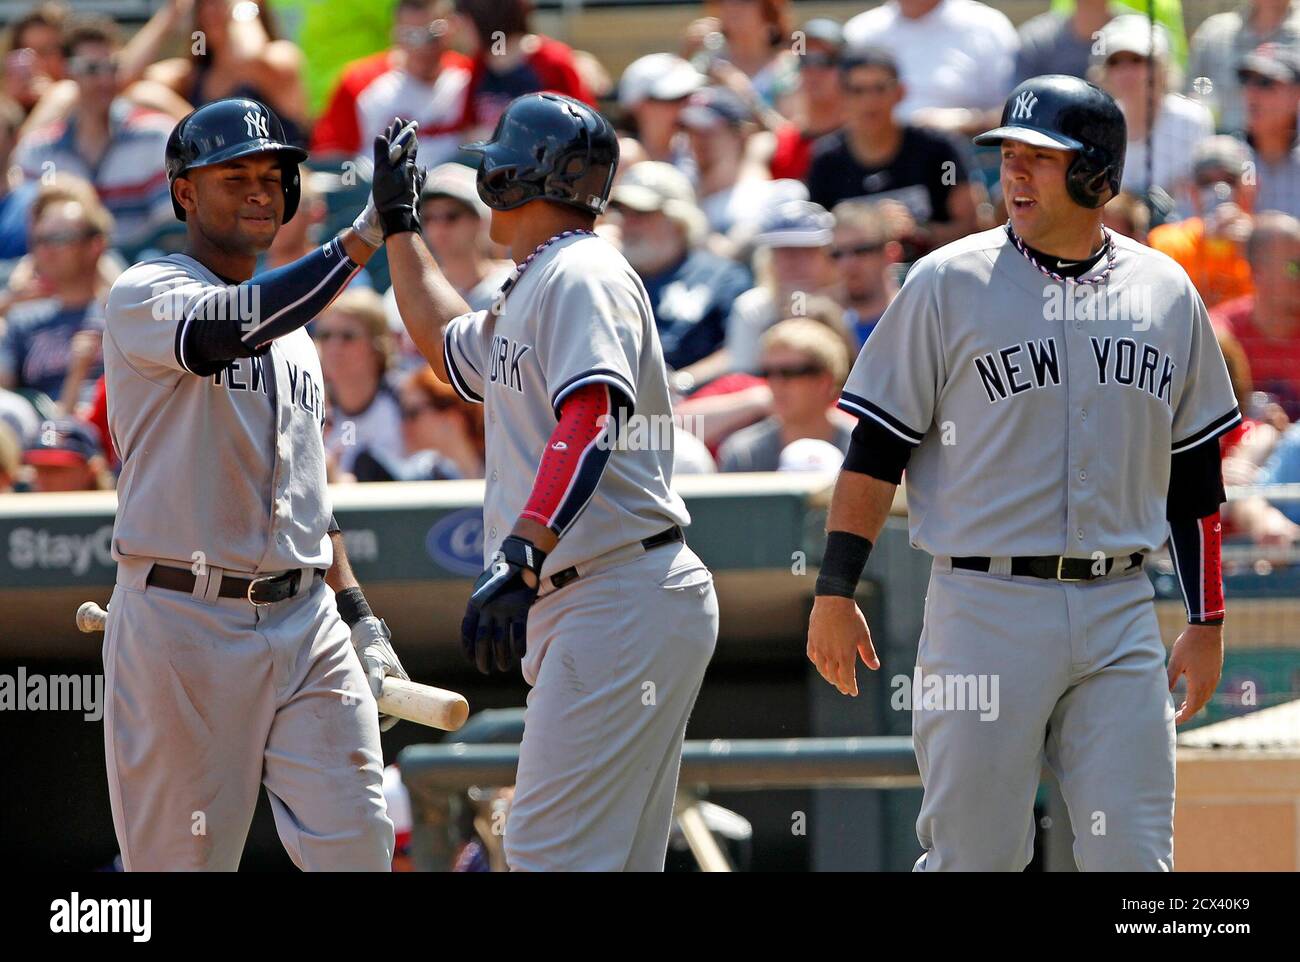 New York Yankees on-deck batter Zoilo Almonte (L) celebrates with teammates Alberto Gonzalez (C) and Austin Romine (R) who score on a hit by Yankees Ichiro Suzuki off Minnesota Twins pitcher Brian Duensing during the sixth inning of their American League MLB baseball game in Minneapolis, July 4, 2013.   REUTERS/Eric Miller (UNITED STATES - Tags: SPORT BASEBALL) Stock Photo